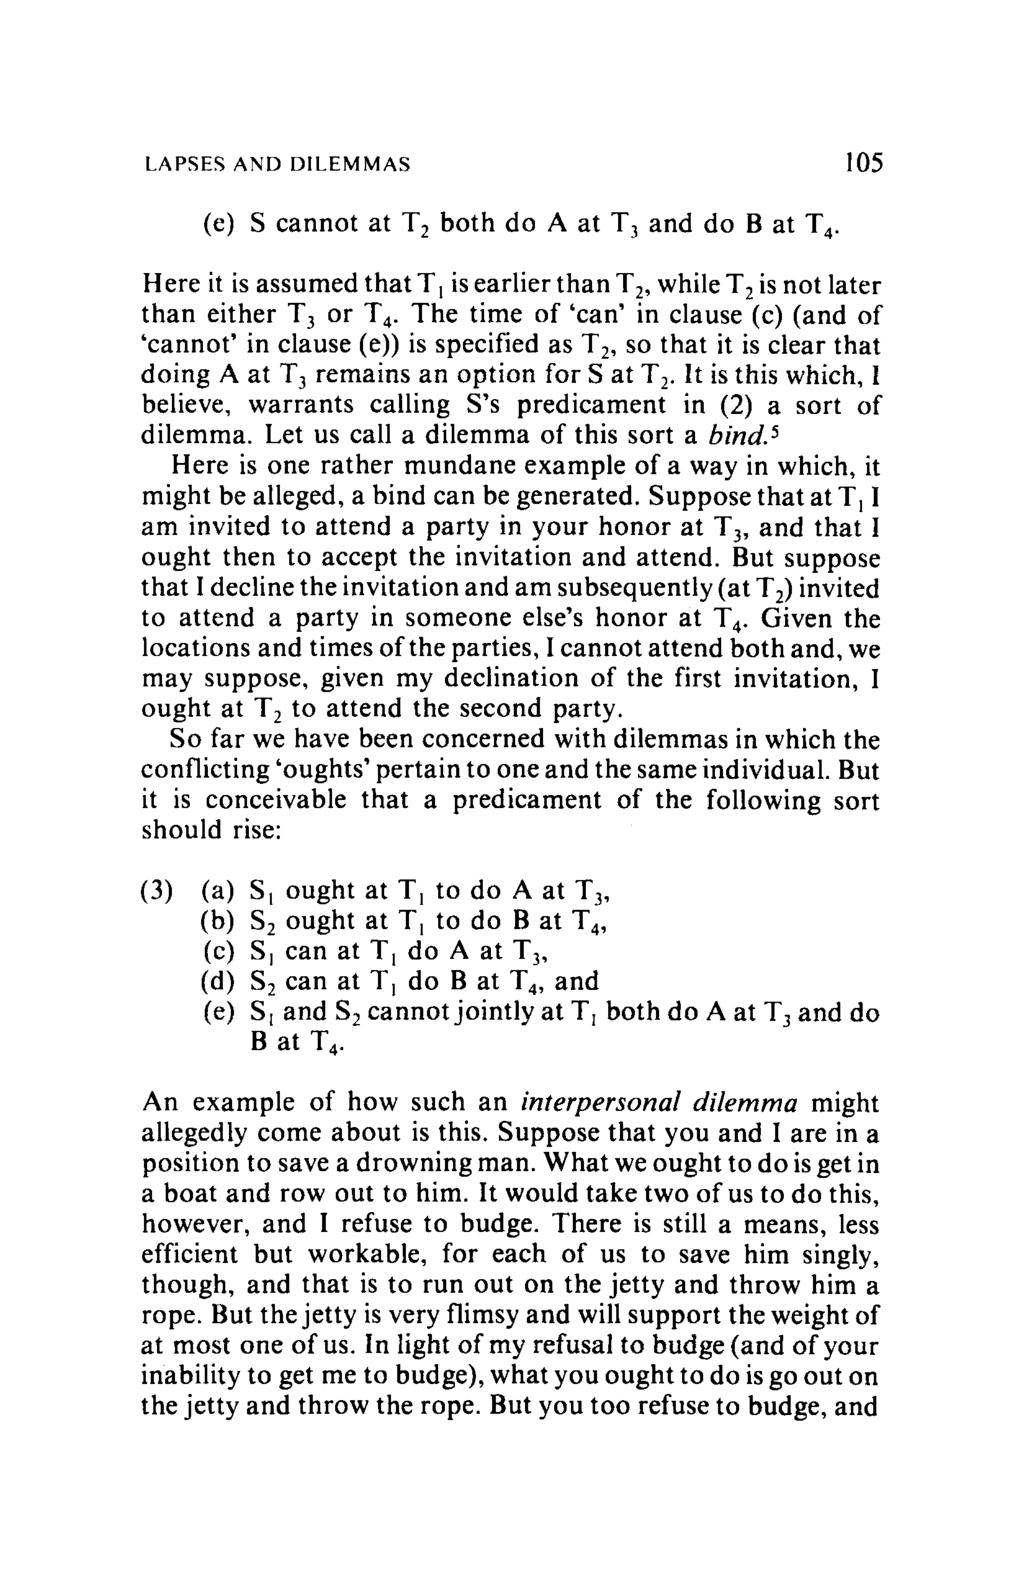 LAPSES AND DILEMMAS 105 (e) S cannot at T, both do A at T, and do B at T,. Here it is assumed that TI is earlier than T,, while T, is not later than either T, or T,.